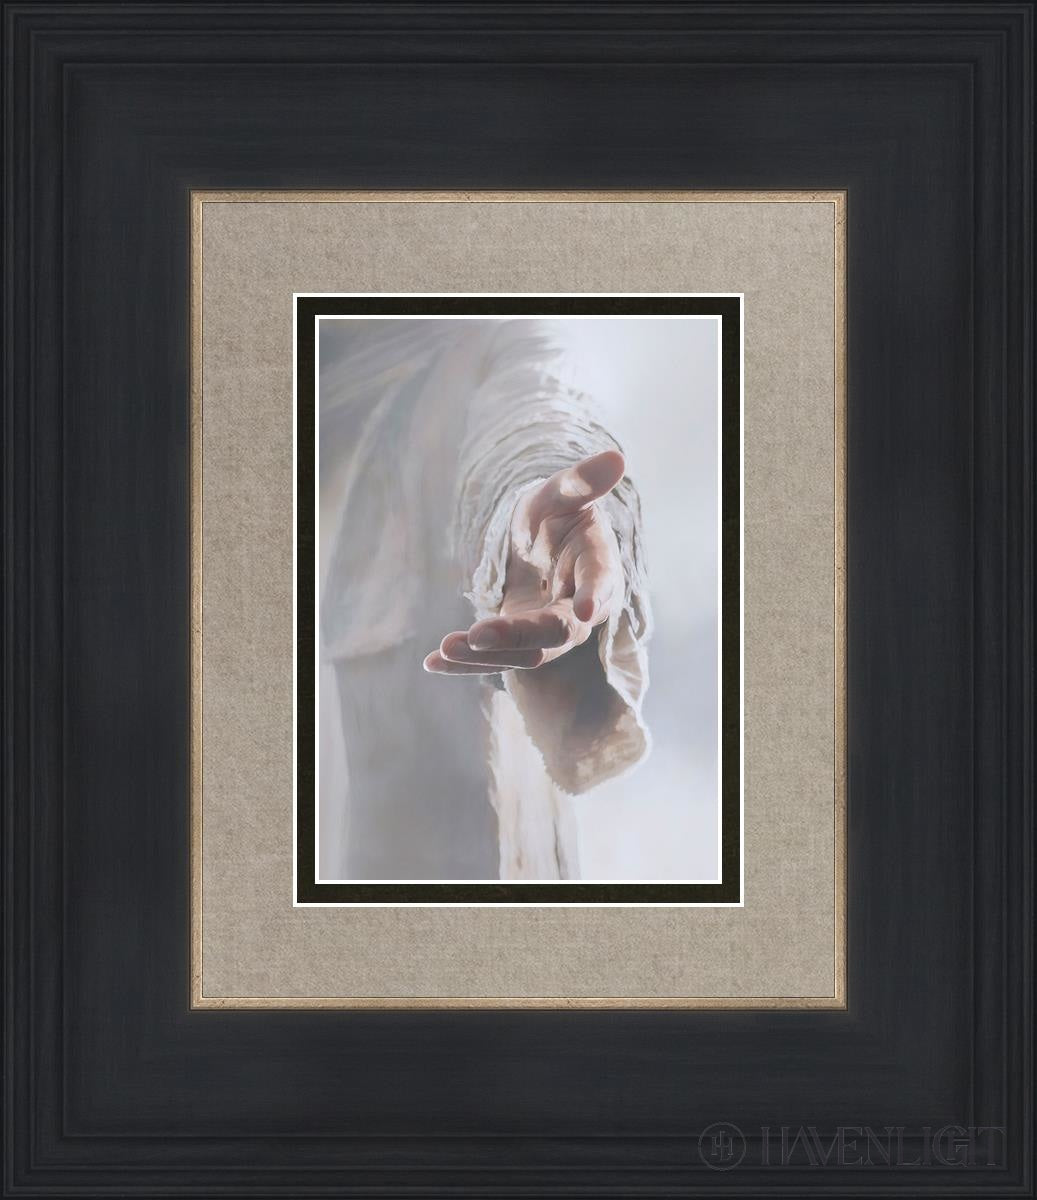 A woman prays while holding a painting depicting Jesus Christ